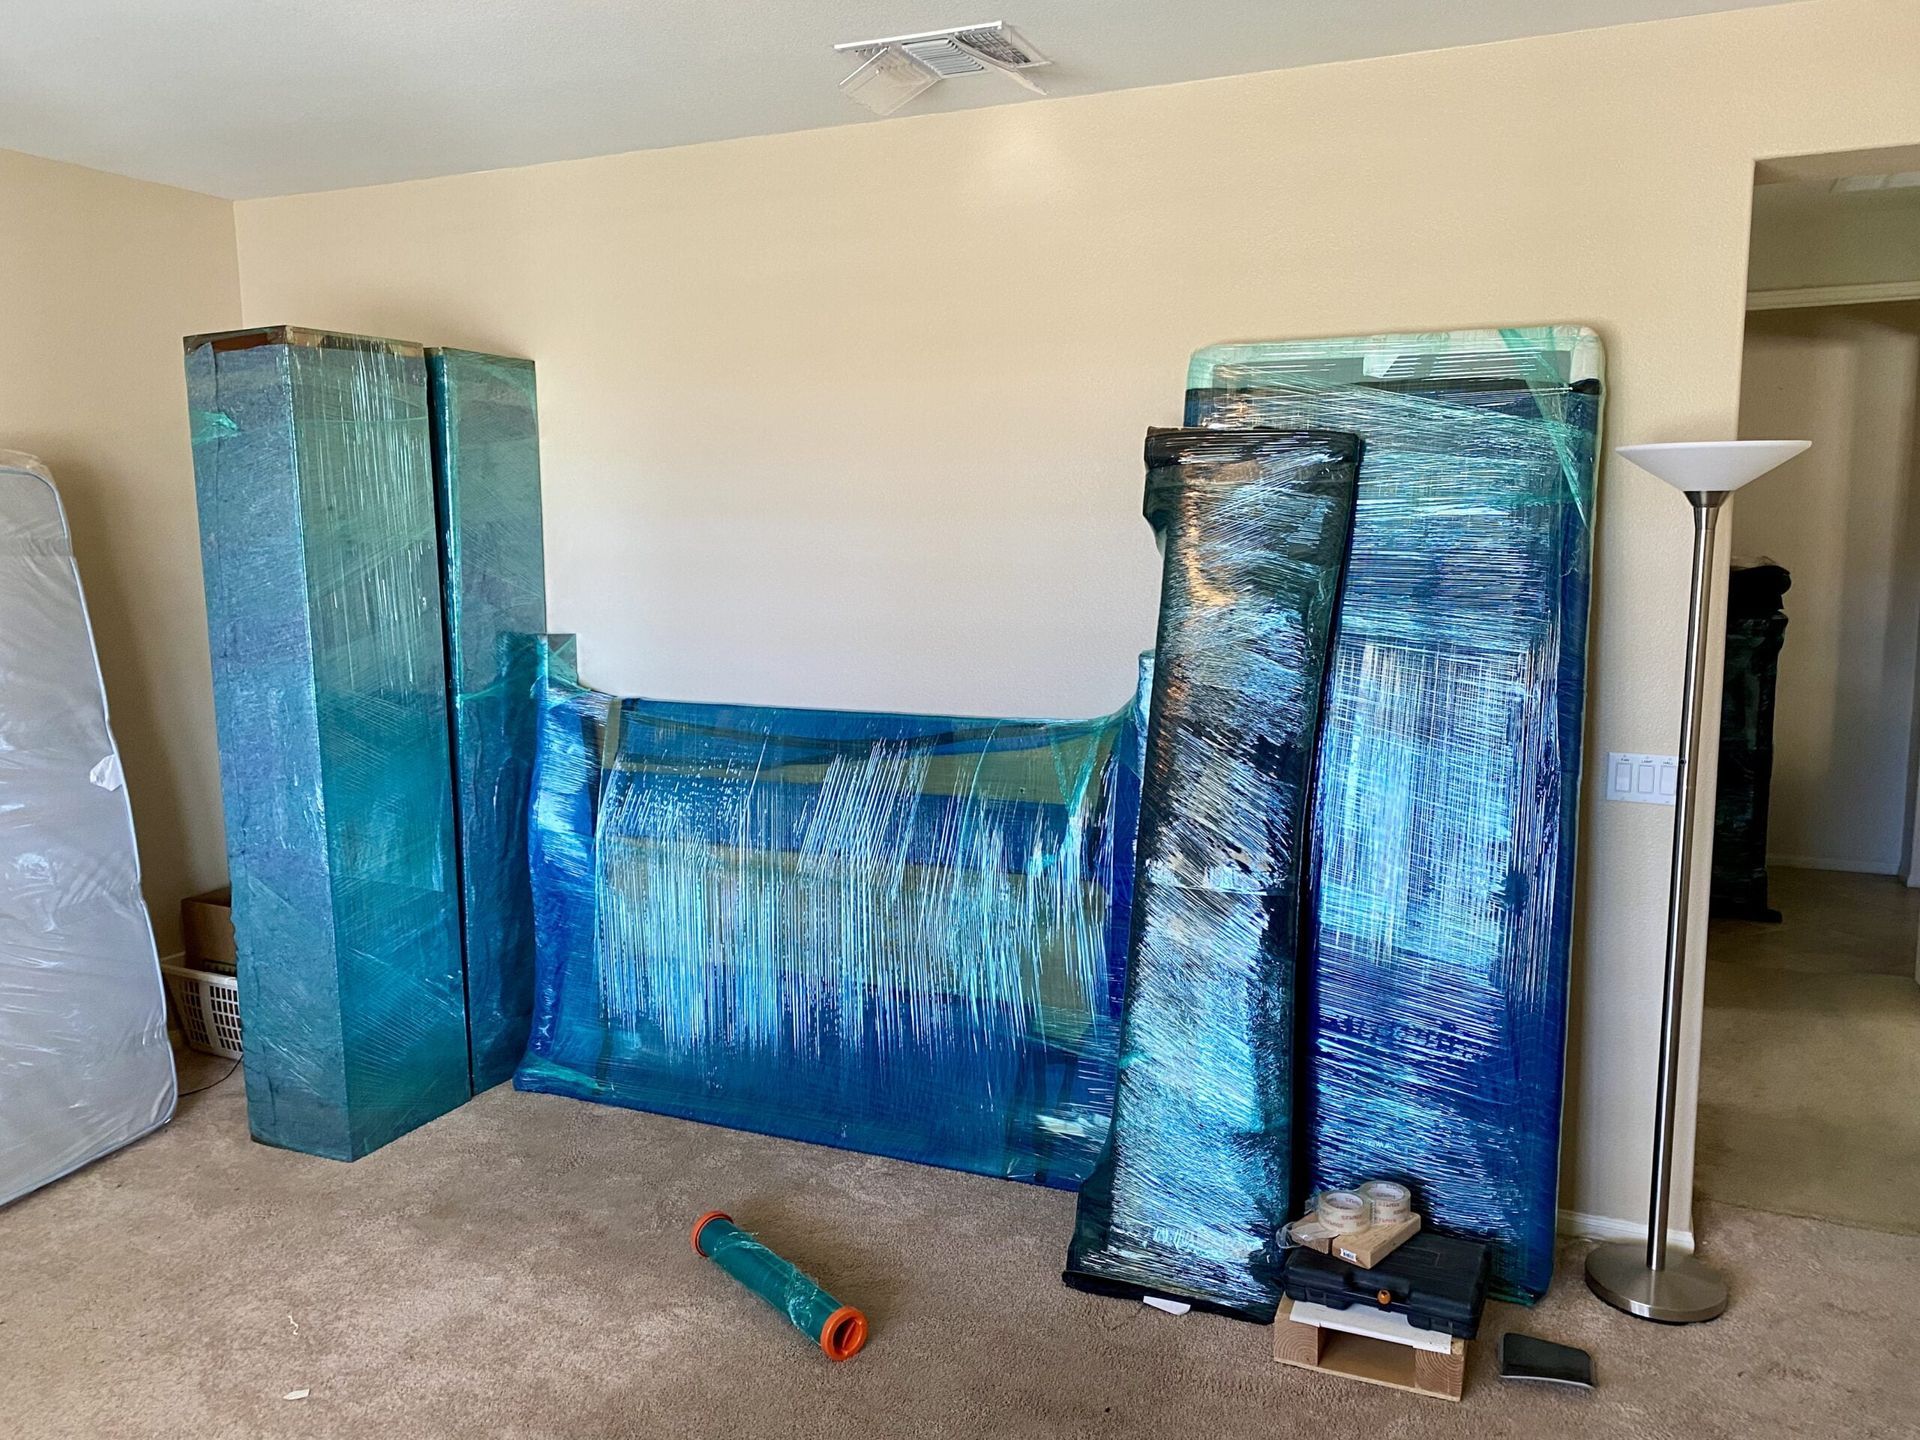 A living room filled with furniture and paintings wrapped in plastic.